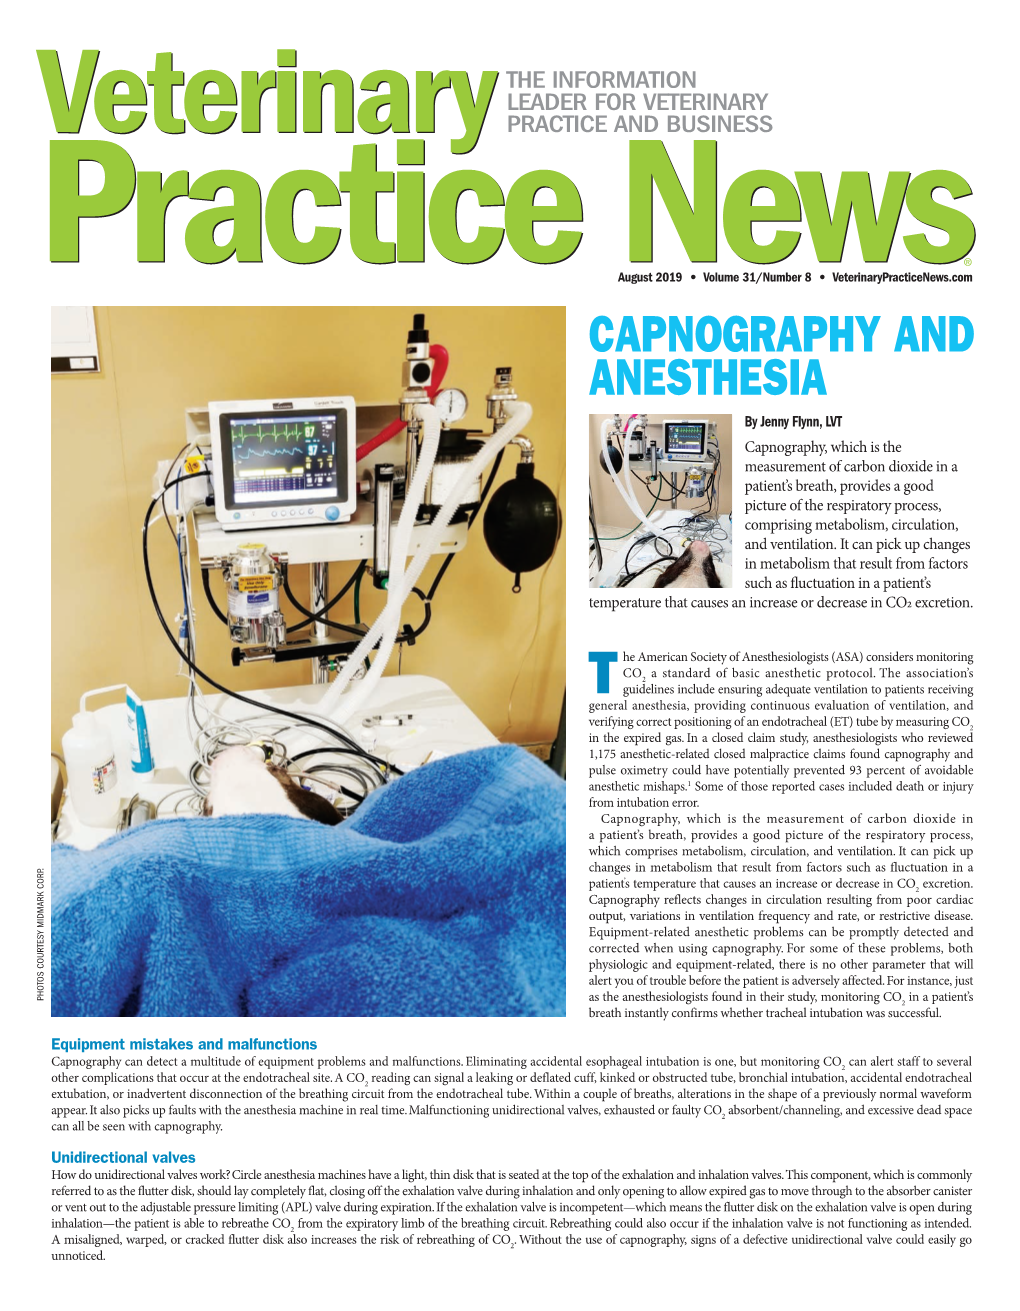 Capnography and Anesthesia